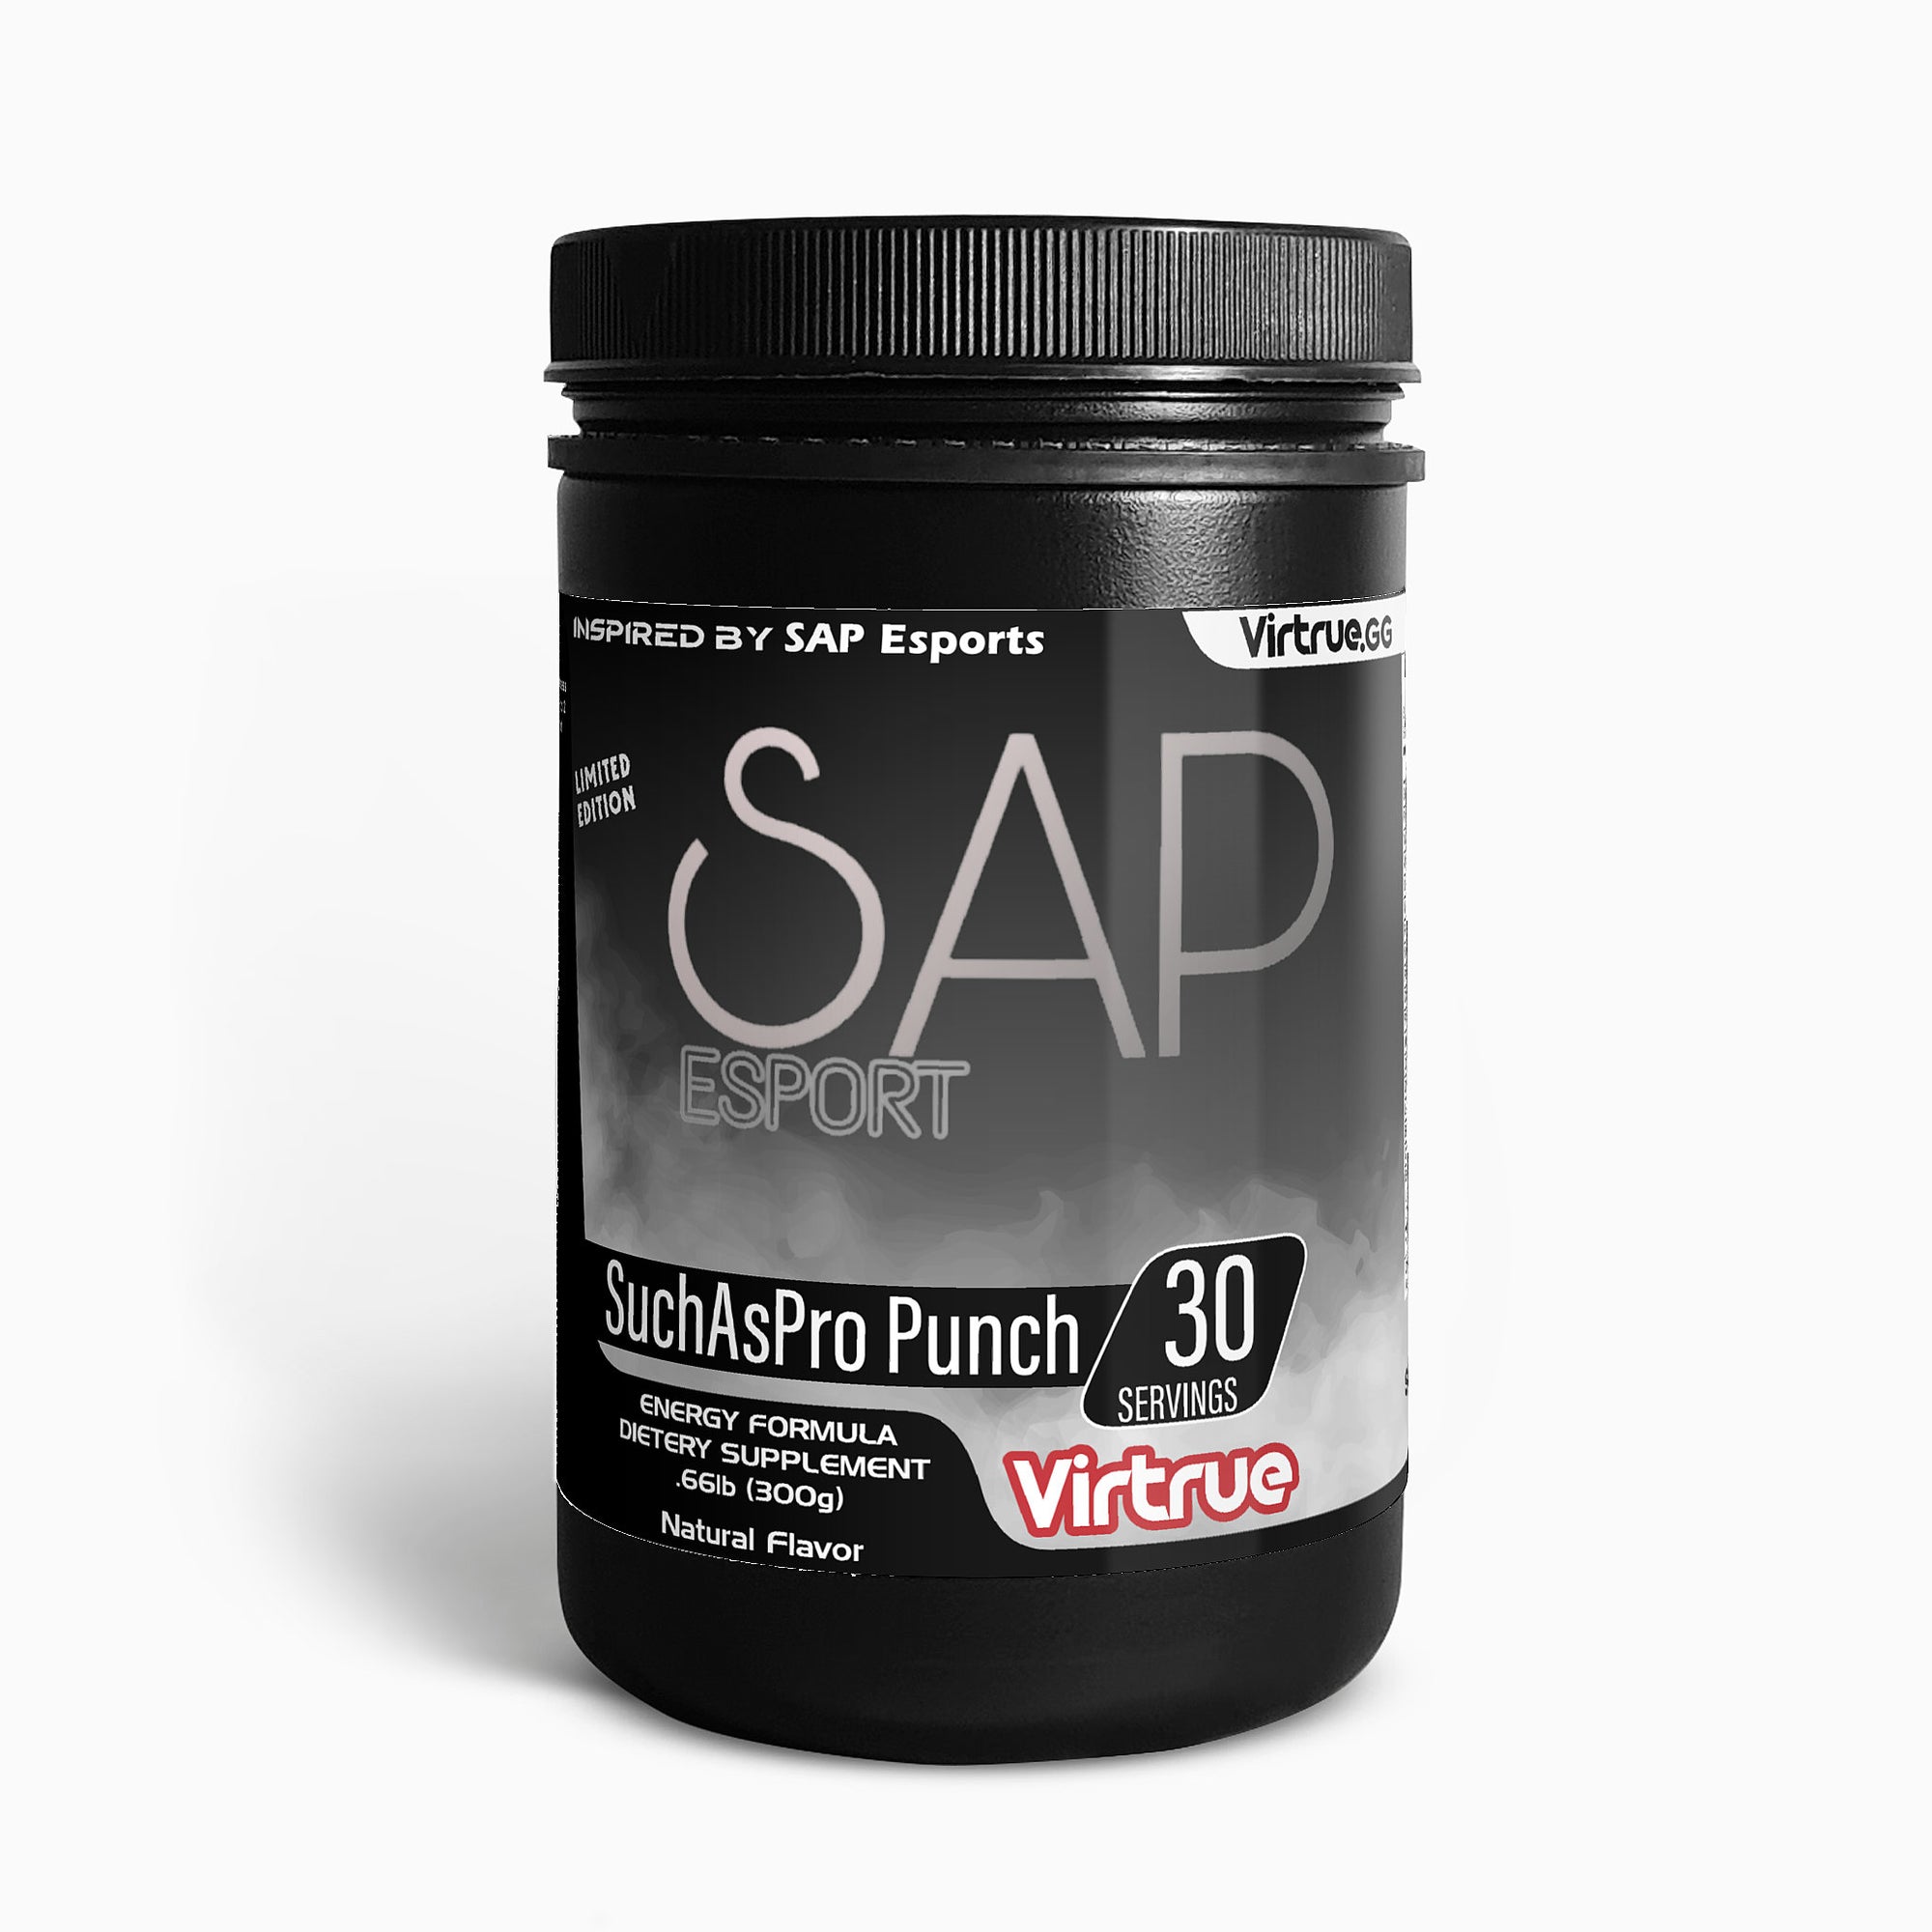 SuchAsPro Punch Energy Formula - Inspired by SAP Esports